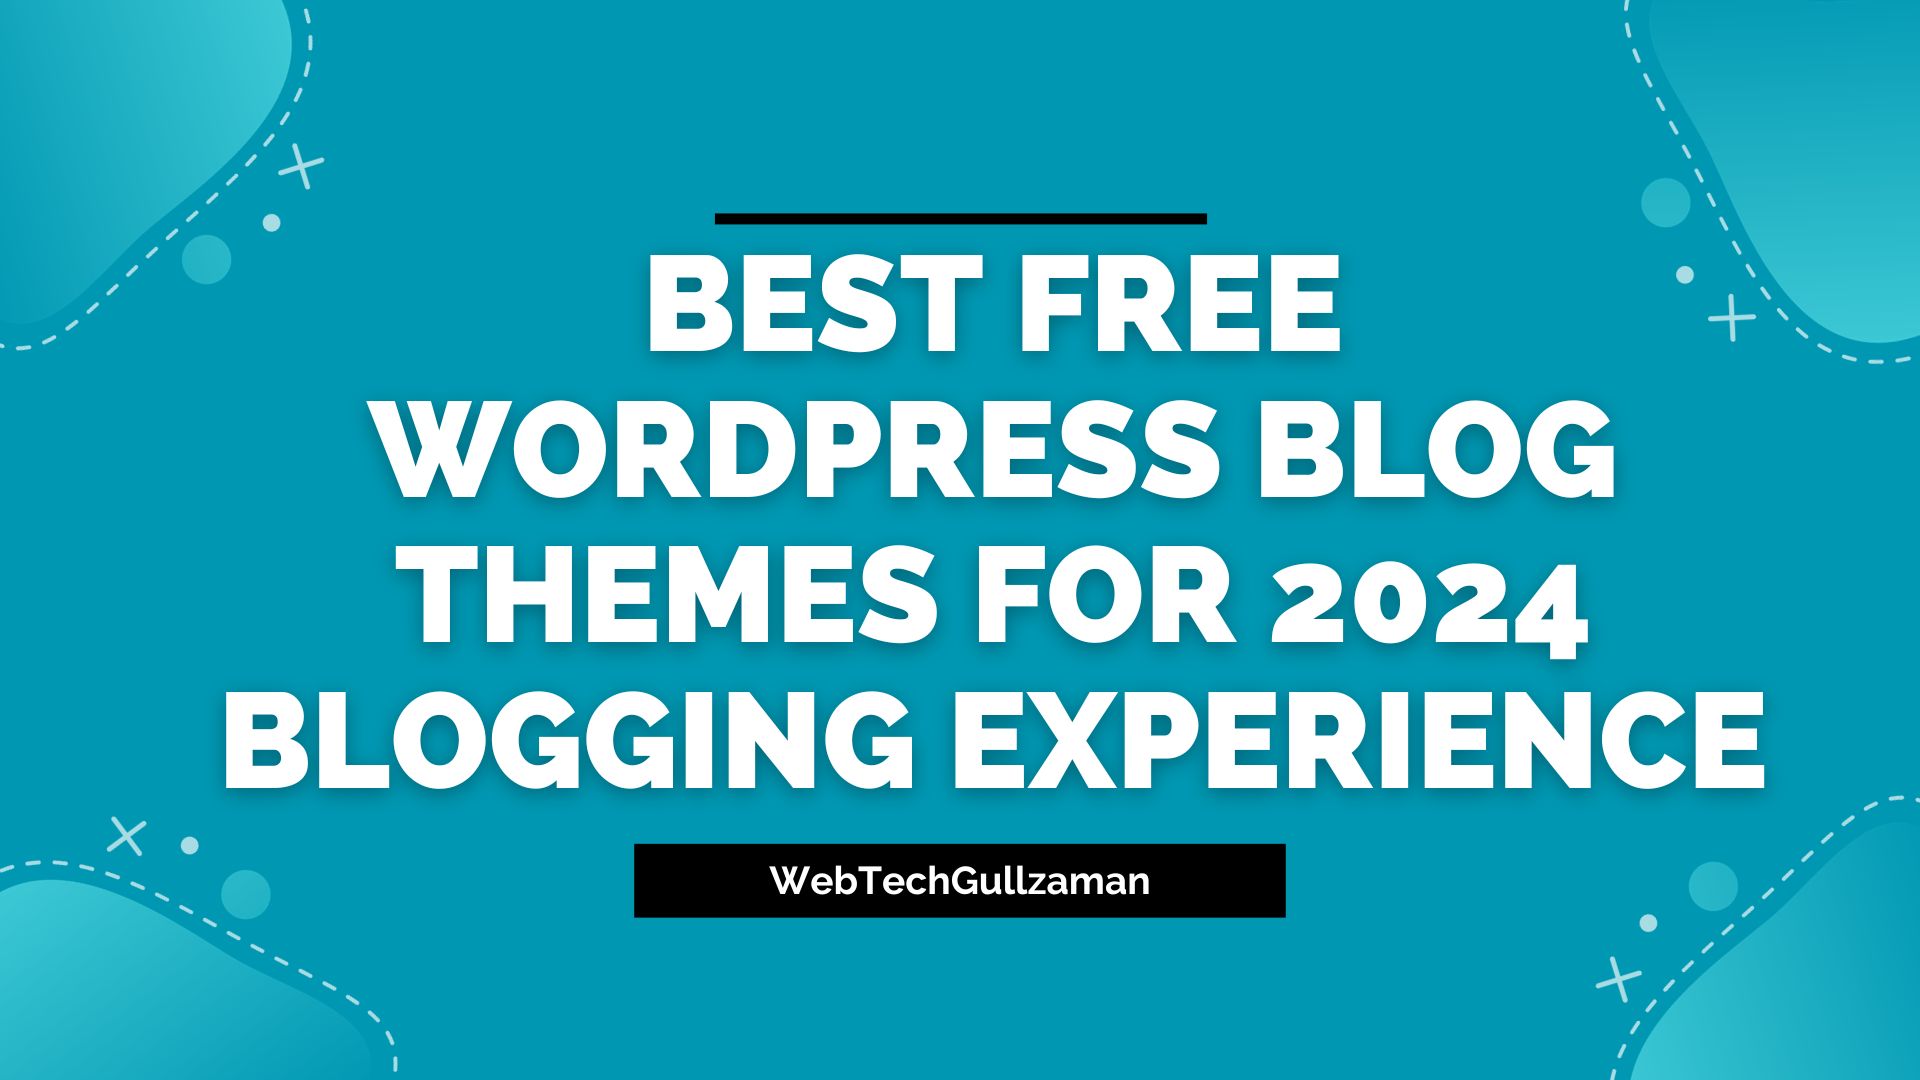 9 Best Free WordPress Blog Themes for 2024 - Blogging Experience